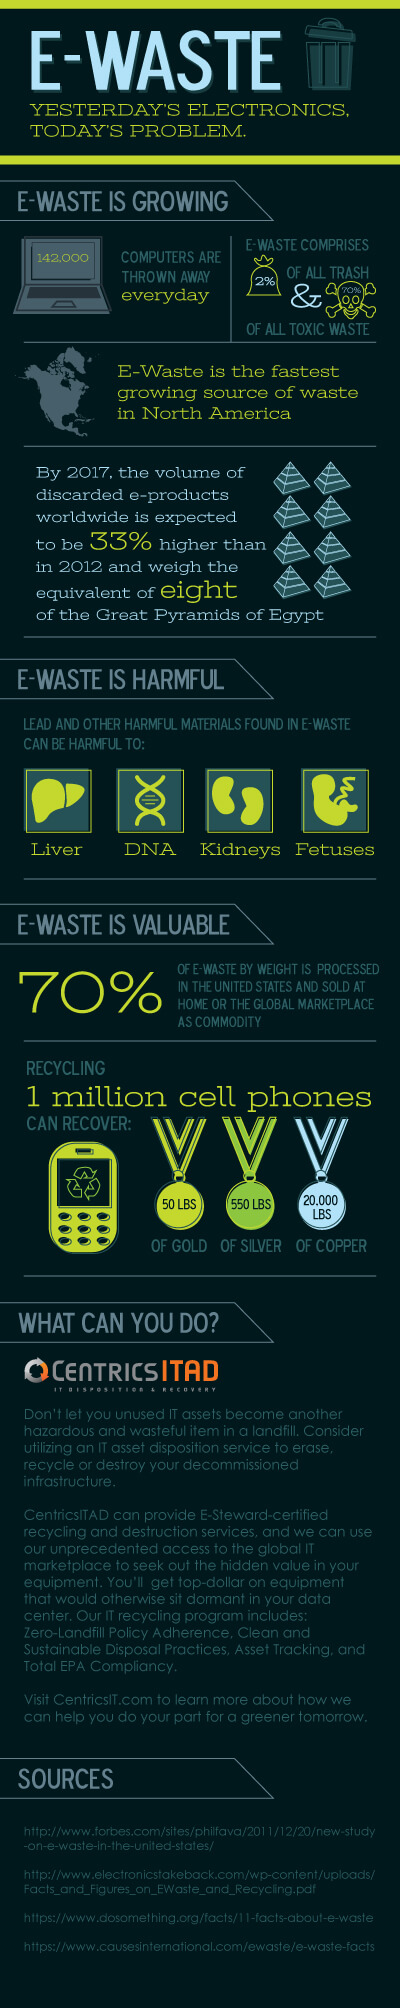 earth-day-ewaste. E-waste. Yesterday’s electronics, today’s problem. E-waste is growing. 142,000 computers are thrown away every day. E-waste comprises 2% of all trash and 70% of all toxic waste. E-waste is the fastest growing source of waste in north America. By 2017, the volume of discard e-products worldwide is expected to be 33% high than in 2012 and weight the equivalent of eight of the great pyramids of Egypt. E-waste is harmful. 70% of e-waste by weight is processed in the United States and sold at home or the global marketplace as commodity. Recycling 1 million cell phones can recover 50 lbs. of gold, 550 lbs. of silver, and 20,000 lbs. of copper. 